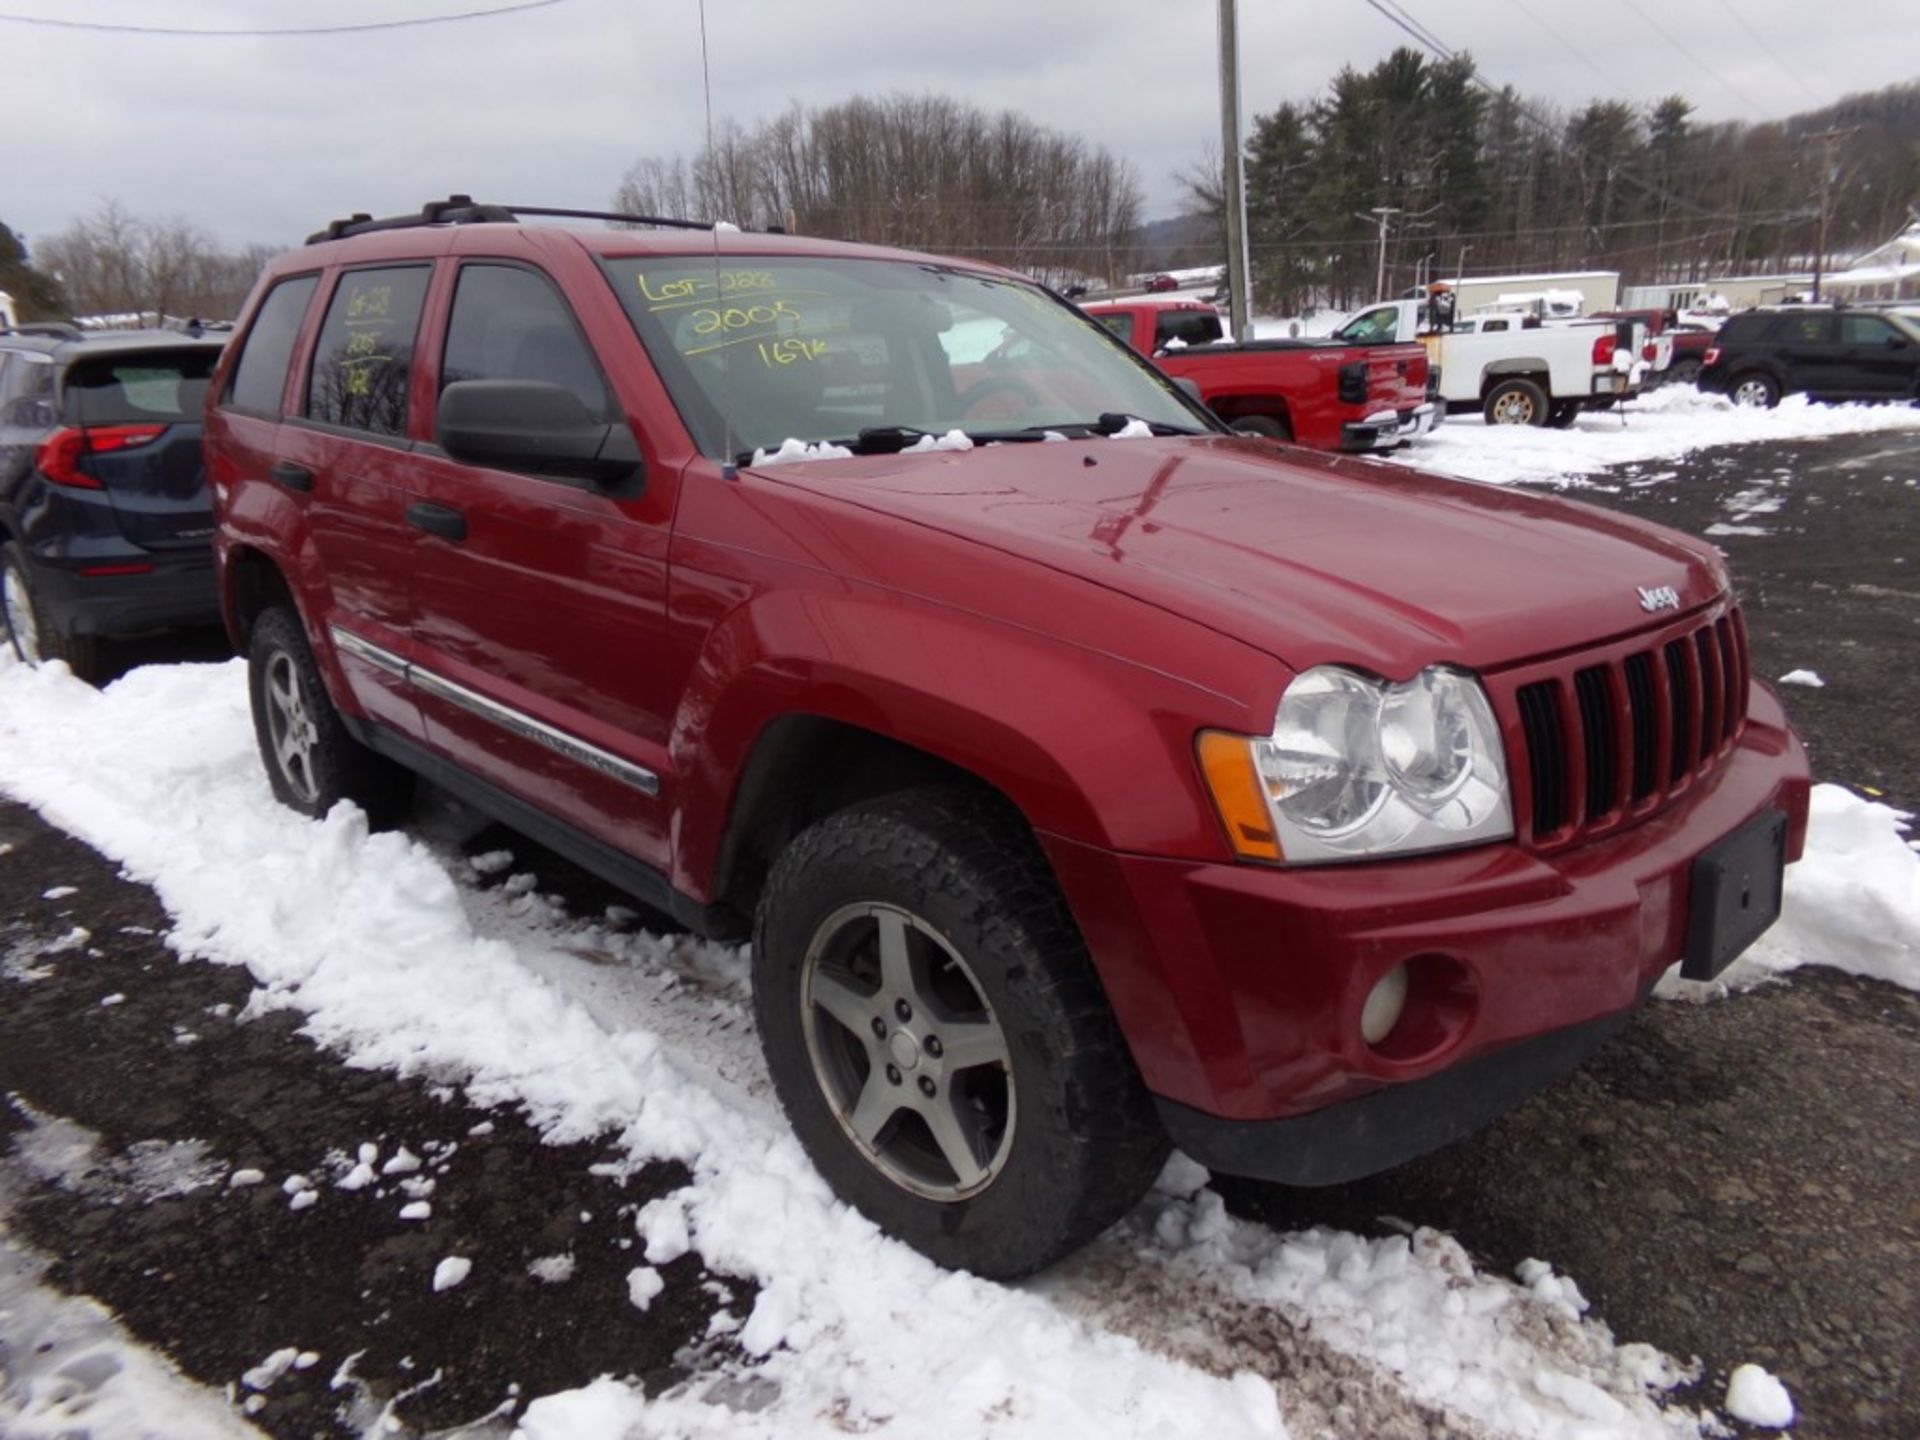 2005 Jeep Grand Cherokee Laredo 4X4, Leather, Sunroof, Red, 169,574 Miles, VIN#1J4HR48N45C731935 - - Image 4 of 6